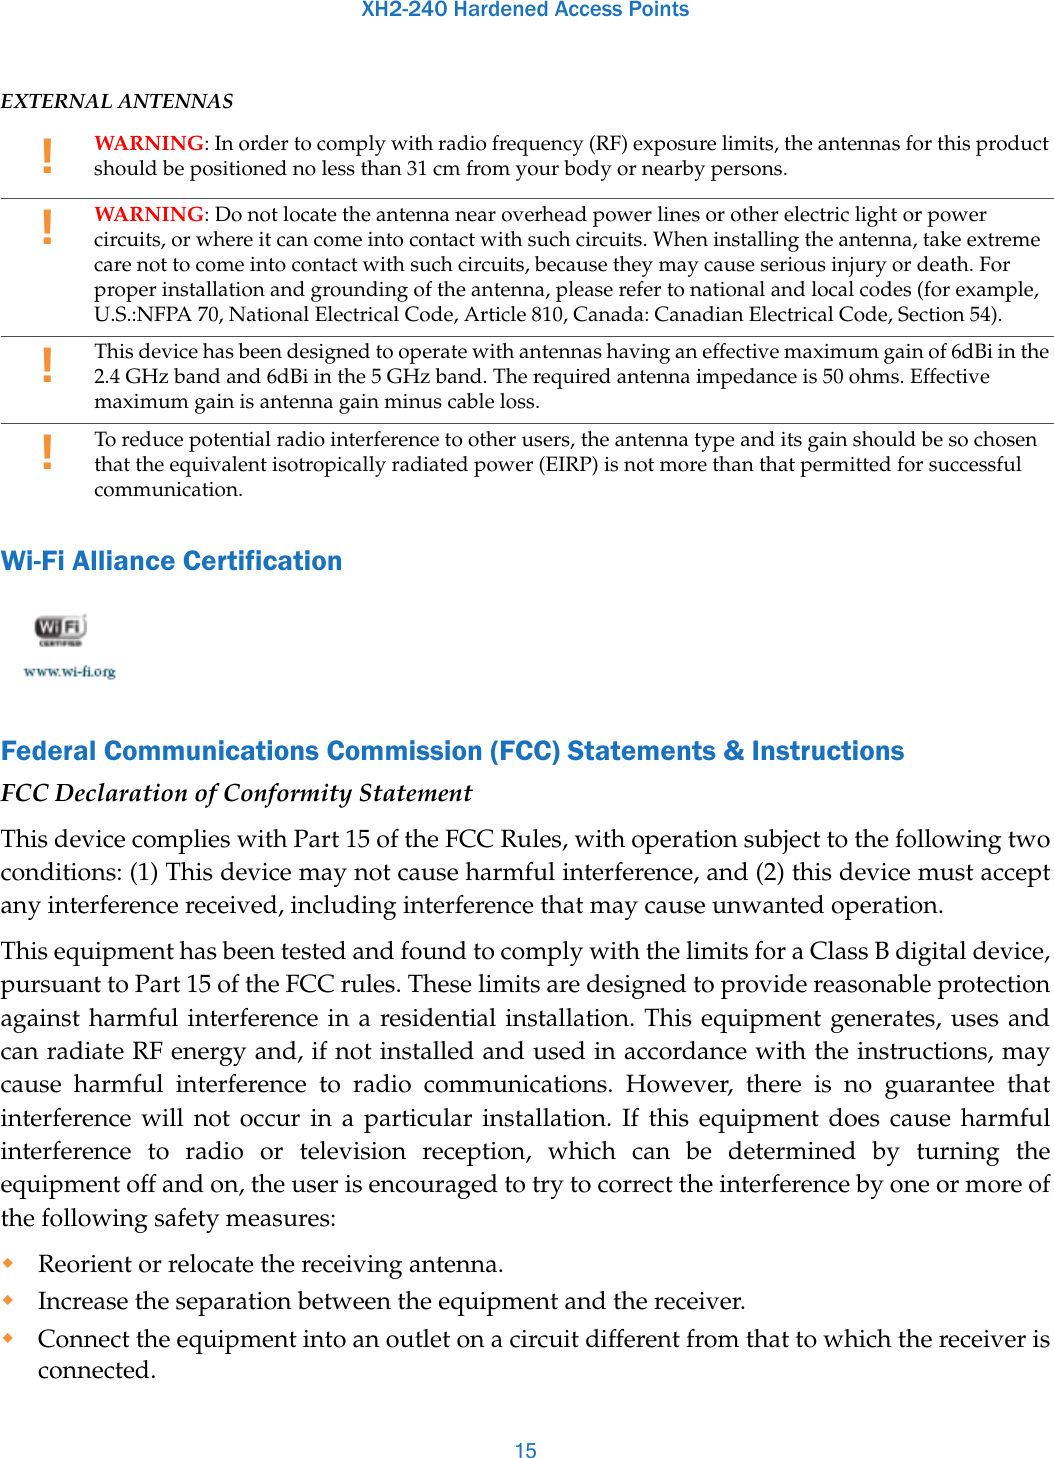 XH2-240 Hardened Access Points15EXTERNAL ANTENNASWi-Fi Alliance CertificationFederal Communications Commission (FCC) Statements &amp; InstructionsFCC Declaration of Conformity StatementThis device complies with Part 15 of the FCC Rules, with operation subject to the following two conditions: (1) This device may not cause harmful interference, and (2) this device must accept any interference received, including interference that may cause unwanted operation. This equipment has been tested and found to comply with the limits for a Class B digital device, pursuant to Part 15 of the FCC rules. These limits are designed to provide reasonable protection against harmful interference in a residential installation. This equipment generates, uses and can radiate RF energy and, if not installed and used in accordance with the instructions, may cause harmful interference to radio communications. However, there is no guarantee that interference will not occur in a particular installation. If this equipment does cause harmful interference to radio or television reception, which can be determined by turning the equipment off and on, the user is encouraged to try to correct the interference by one or more of the following safety measures:Reorient or relocate the receiving antenna.Increase the separation between the equipment and the receiver.Connect the equipment into an outlet on a circuit different from that to which the receiver is connected.!WARNING: In order to comply with radio frequency (RF) exposure limits, the antennas for this product should be positioned no less than 31 cm from your body or nearby persons. !WARNING: Do not locate the antenna near overhead power lines or other electric light or power circuits, or where it can come into contact with such circuits. When installing the antenna, take extreme care not to come into contact with such circuits, because they may cause serious injury or death. For proper installation and grounding of the antenna, please refer to national and local codes (for example, U.S.:NFPA 70, National Electrical Code, Article 810, Canada: Canadian Electrical Code, Section 54). !This device has been designed to operate with antennas having an effective maximum gain of 6dBi in the 2.4 GHz band and 6dBi in the 5 GHz band. The required antenna impedance is 50 ohms. Effective maximum gain is antenna gain minus cable loss.!To reduce potential radio interference to other users, the antenna type and its gain should be so chosen that the equivalent isotropically radiated power (EIRP) is not more than that permitted for successful communication. 